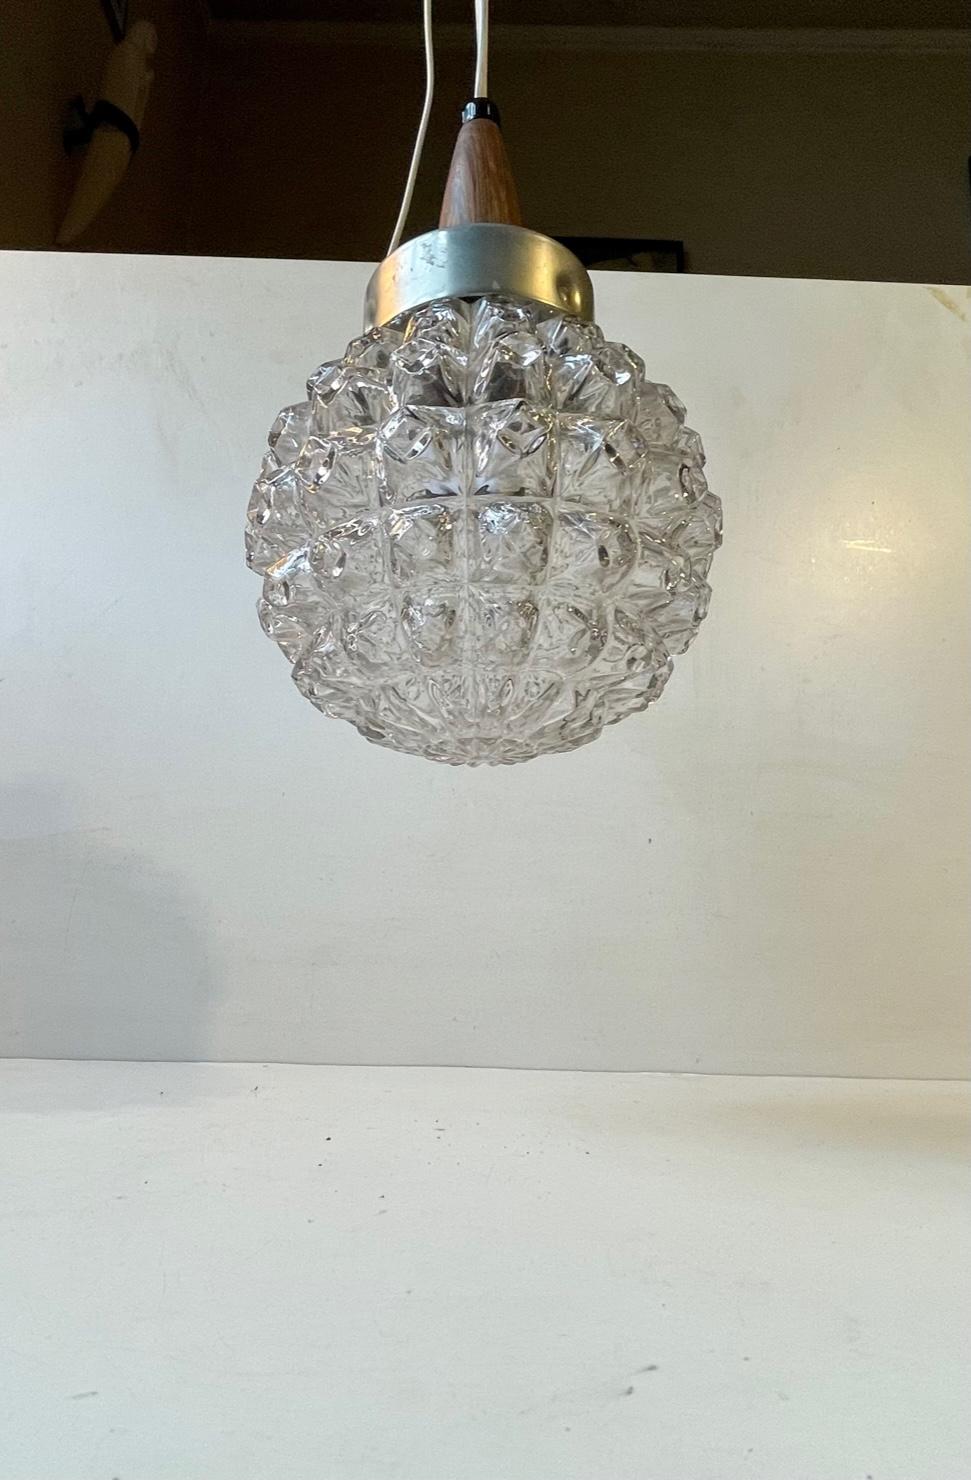 This pendant light was designed and manufactured by Danish design trio Vitrika in the 1960s. The name Vitrika, or Vi-Tri-Ka means 'The three of us can do it'. The lamp features a pineapple - patterned clear glass shade and a rosewood top. It will be